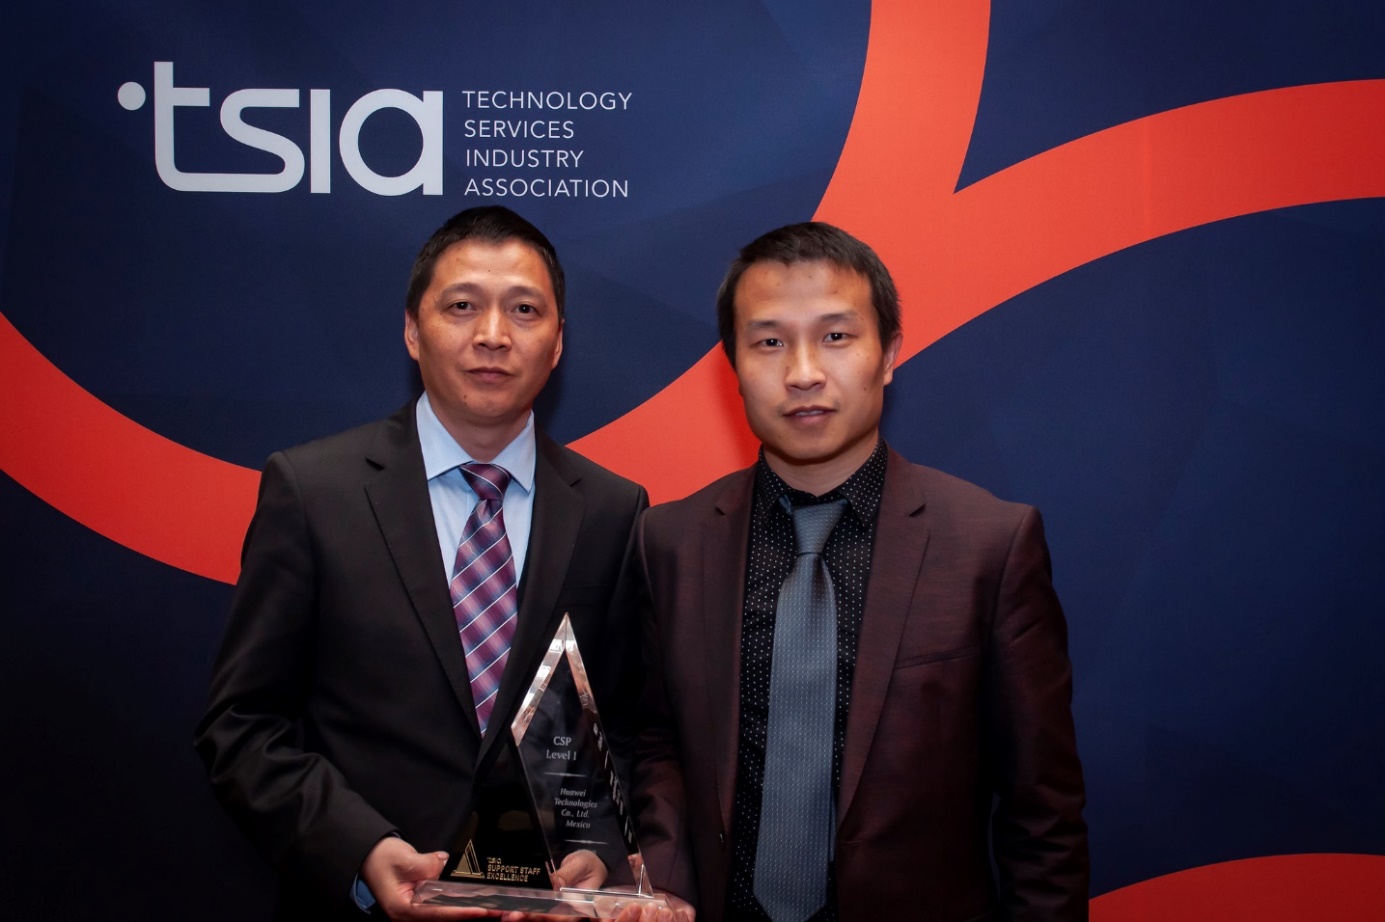 Li Xiaoming and Ren Yuanzhuo of Huawei Enterprise Mexico GSC holding a Support Staff Excellence award from TSIA